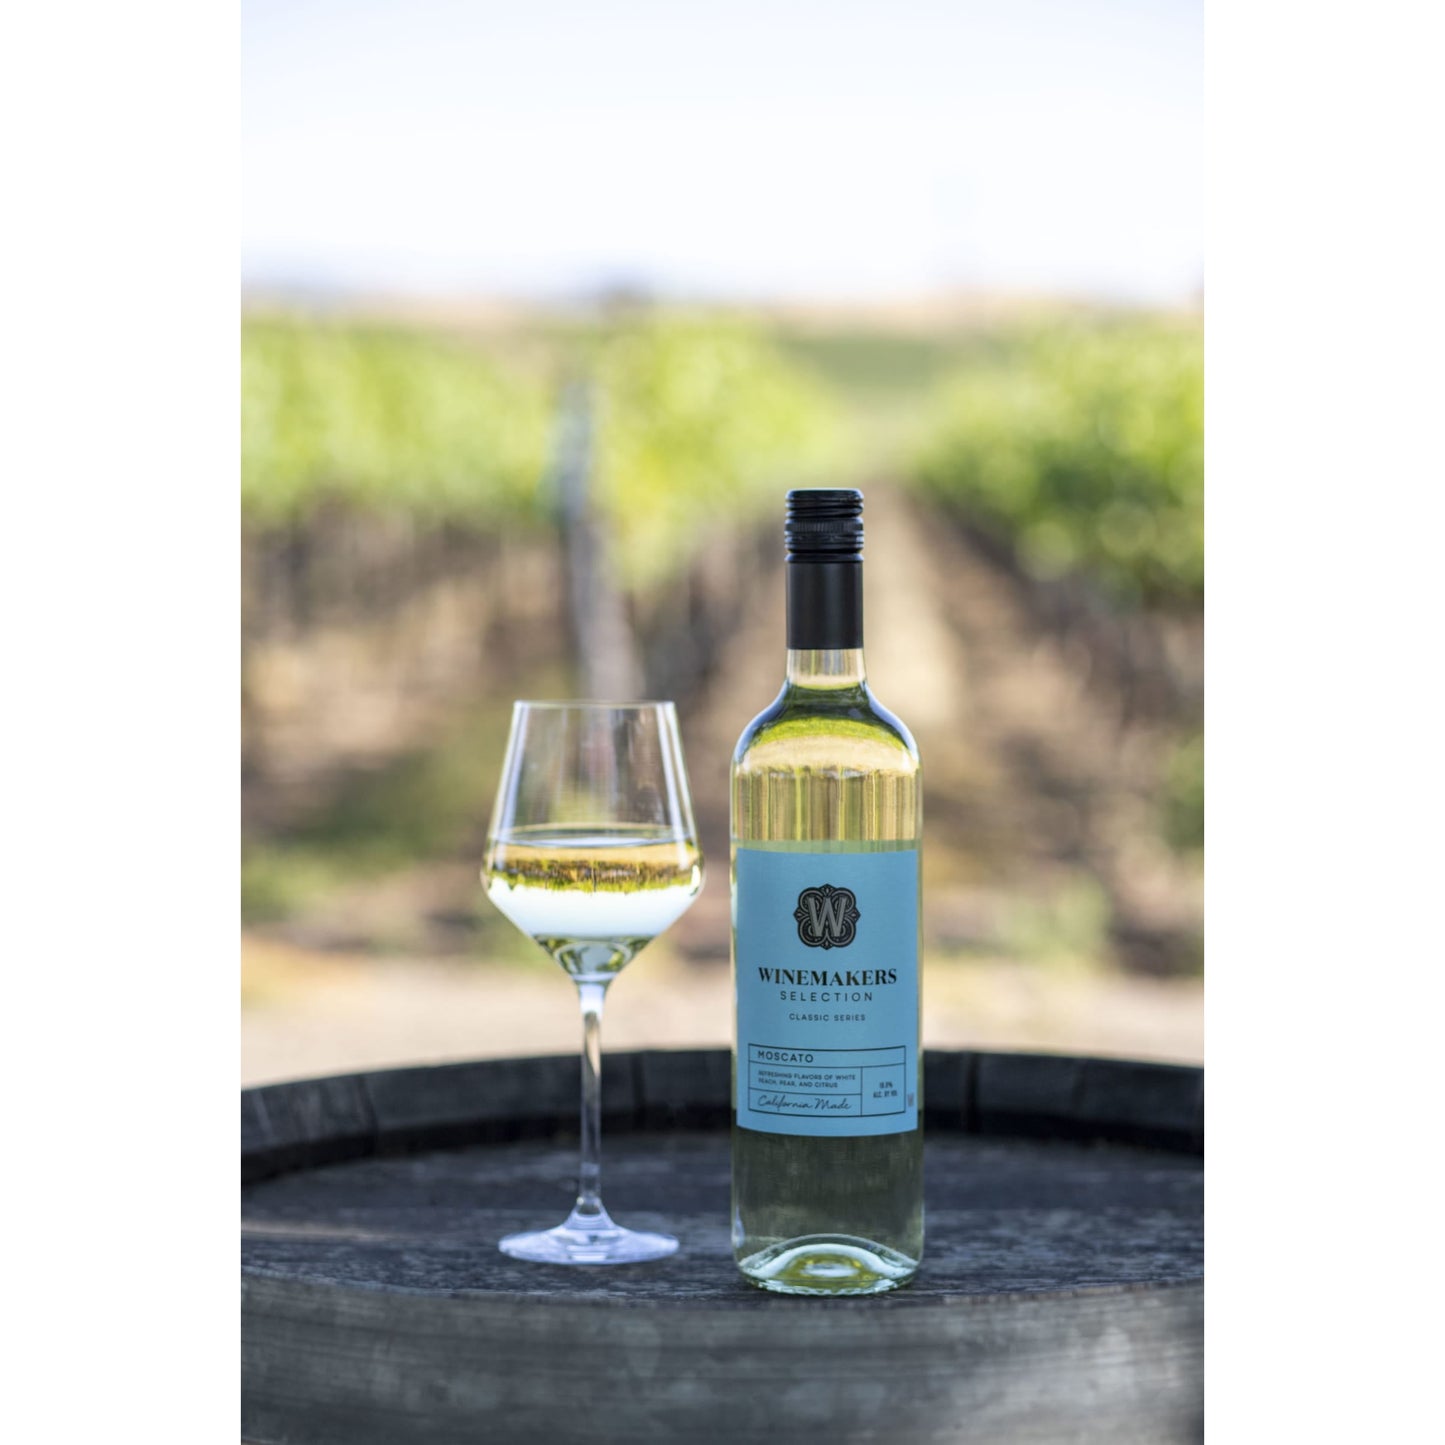 Winemakers Selection Classic Series Moscato California White Wine, 750 ml Glass, ABV 10.00%